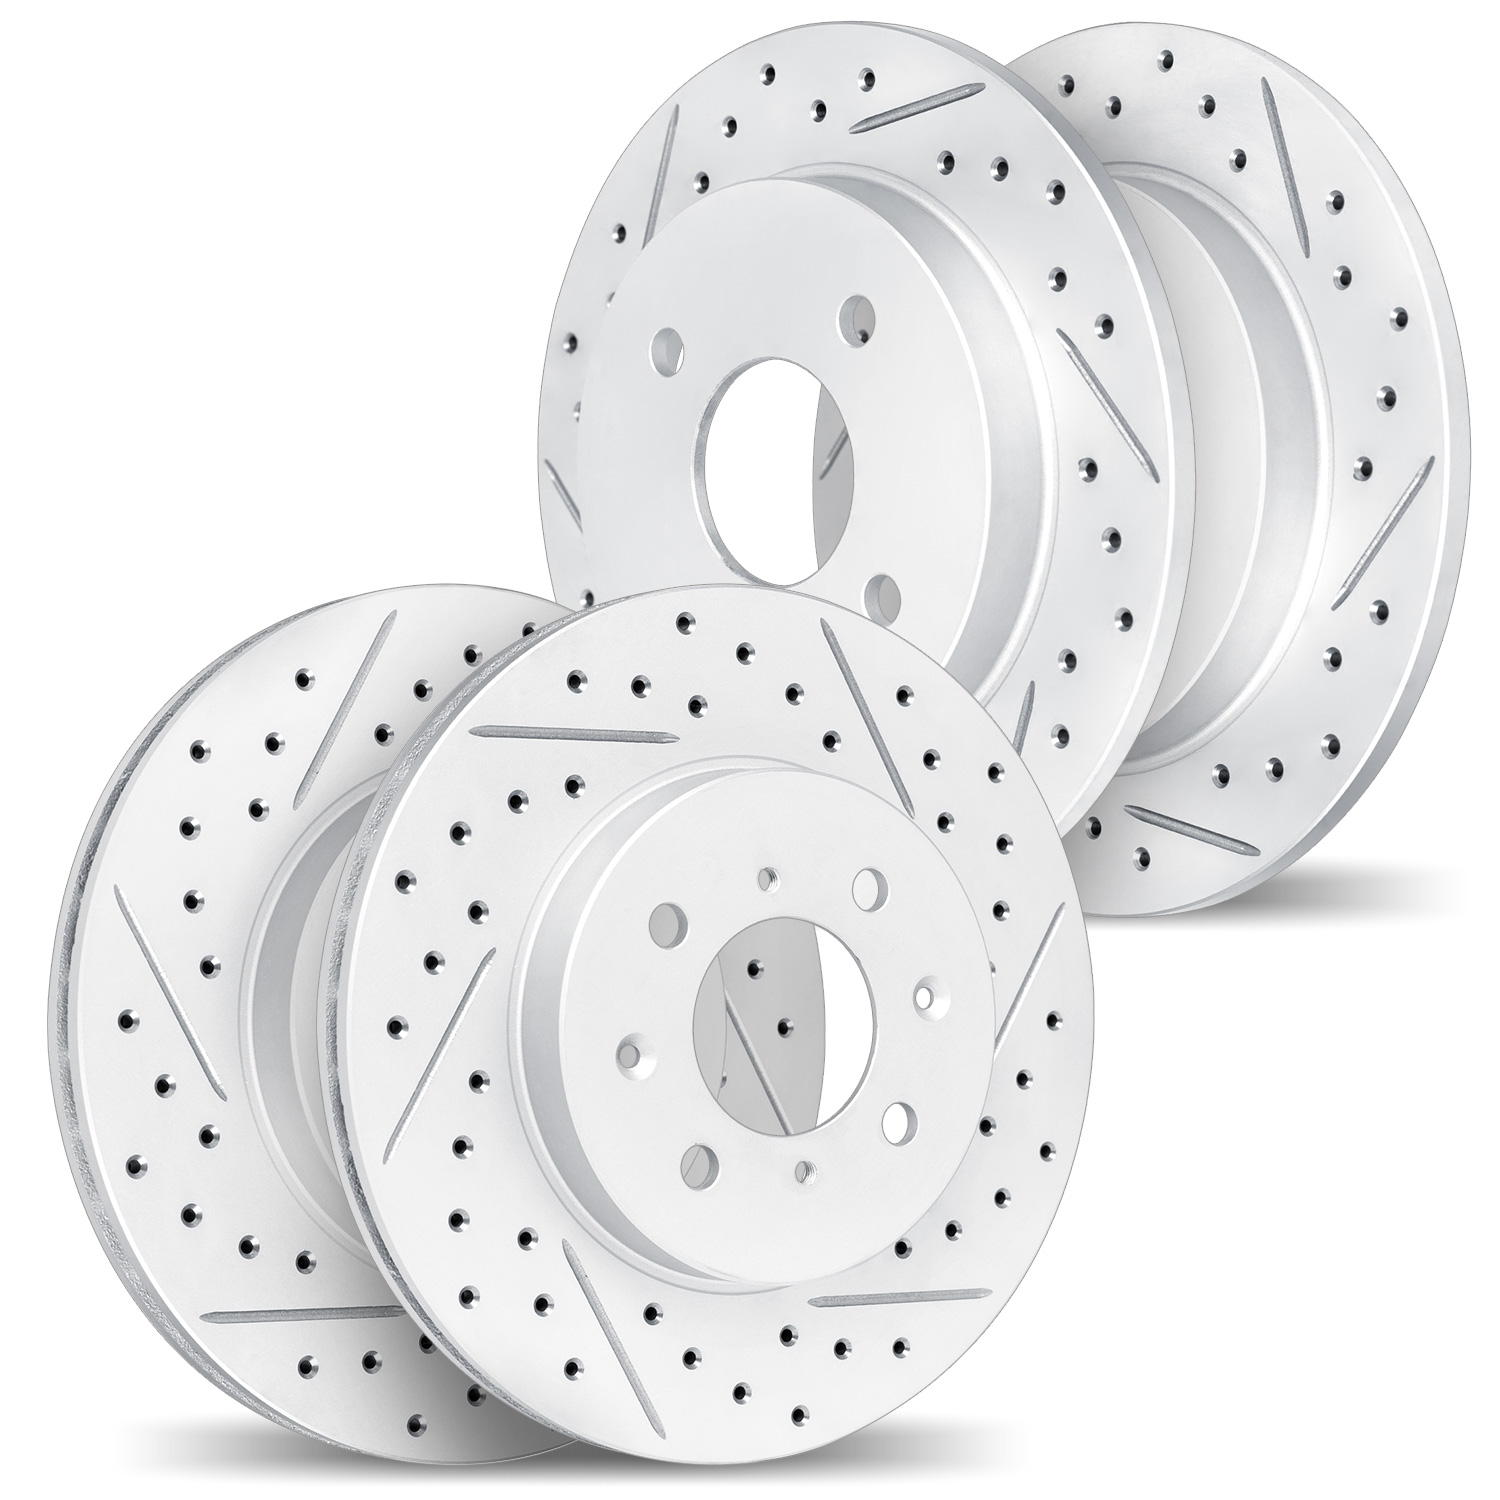 2004-21015 Geoperformance Drilled/Slotted Brake Rotors, 2004-2009 Kia/Hyundai/Genesis, Position: Front and Rear